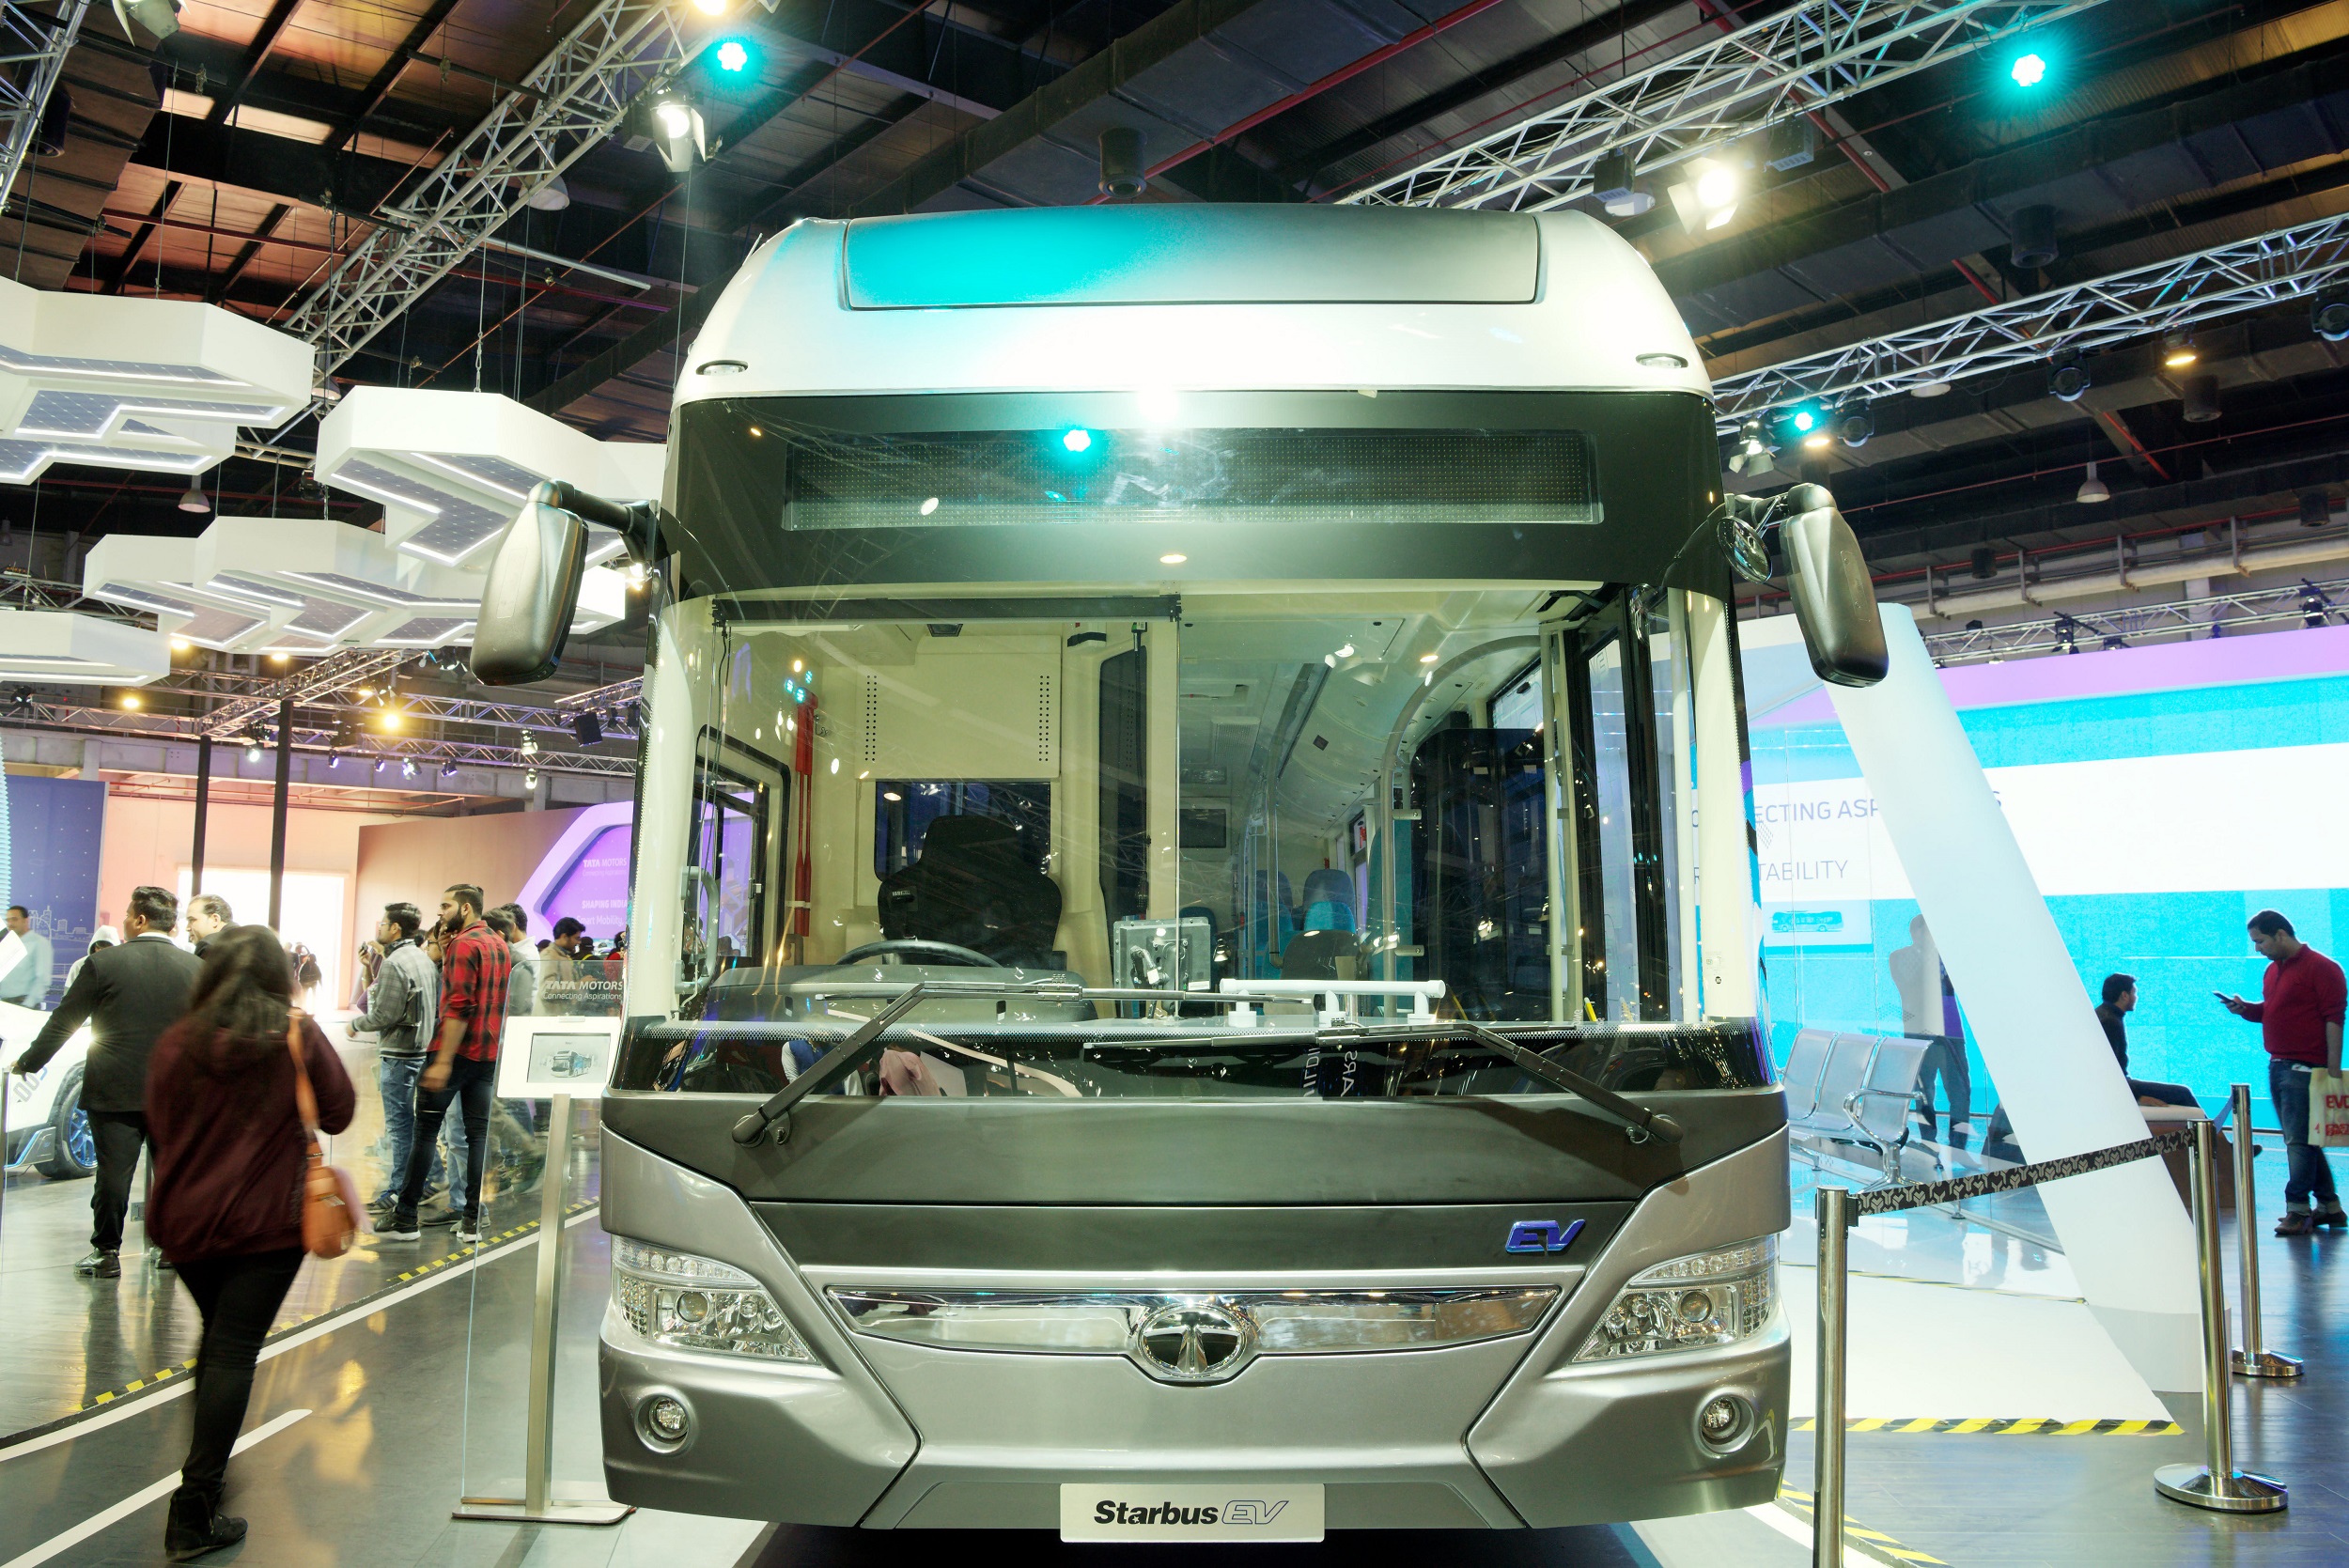 Tata Motors showcase their Starbus electric commercial vehicle at Auto Expo 2018 in Greater Noida, India [image: Alamy]